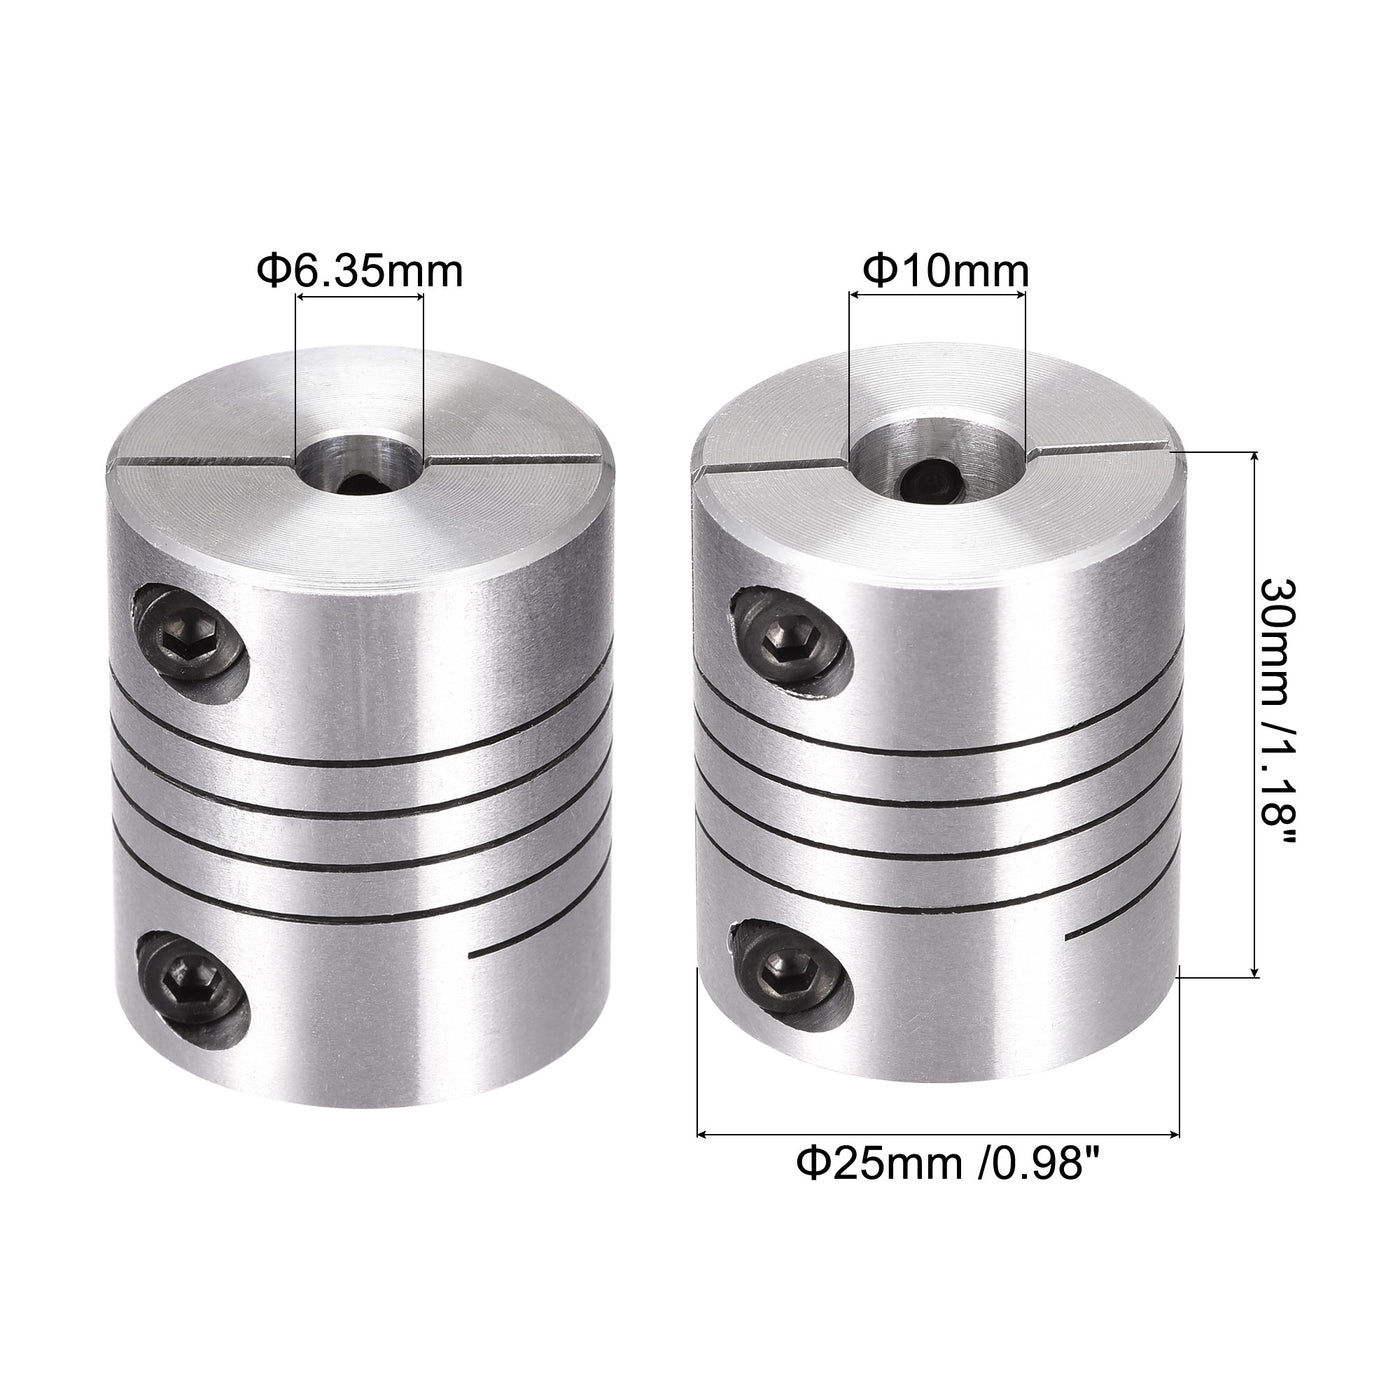 uxcell Uxcell 2PCS Motor Shaft 6.35mm to 10mm Helical Beam Coupler Coupling 25mm Dia 30mm Long